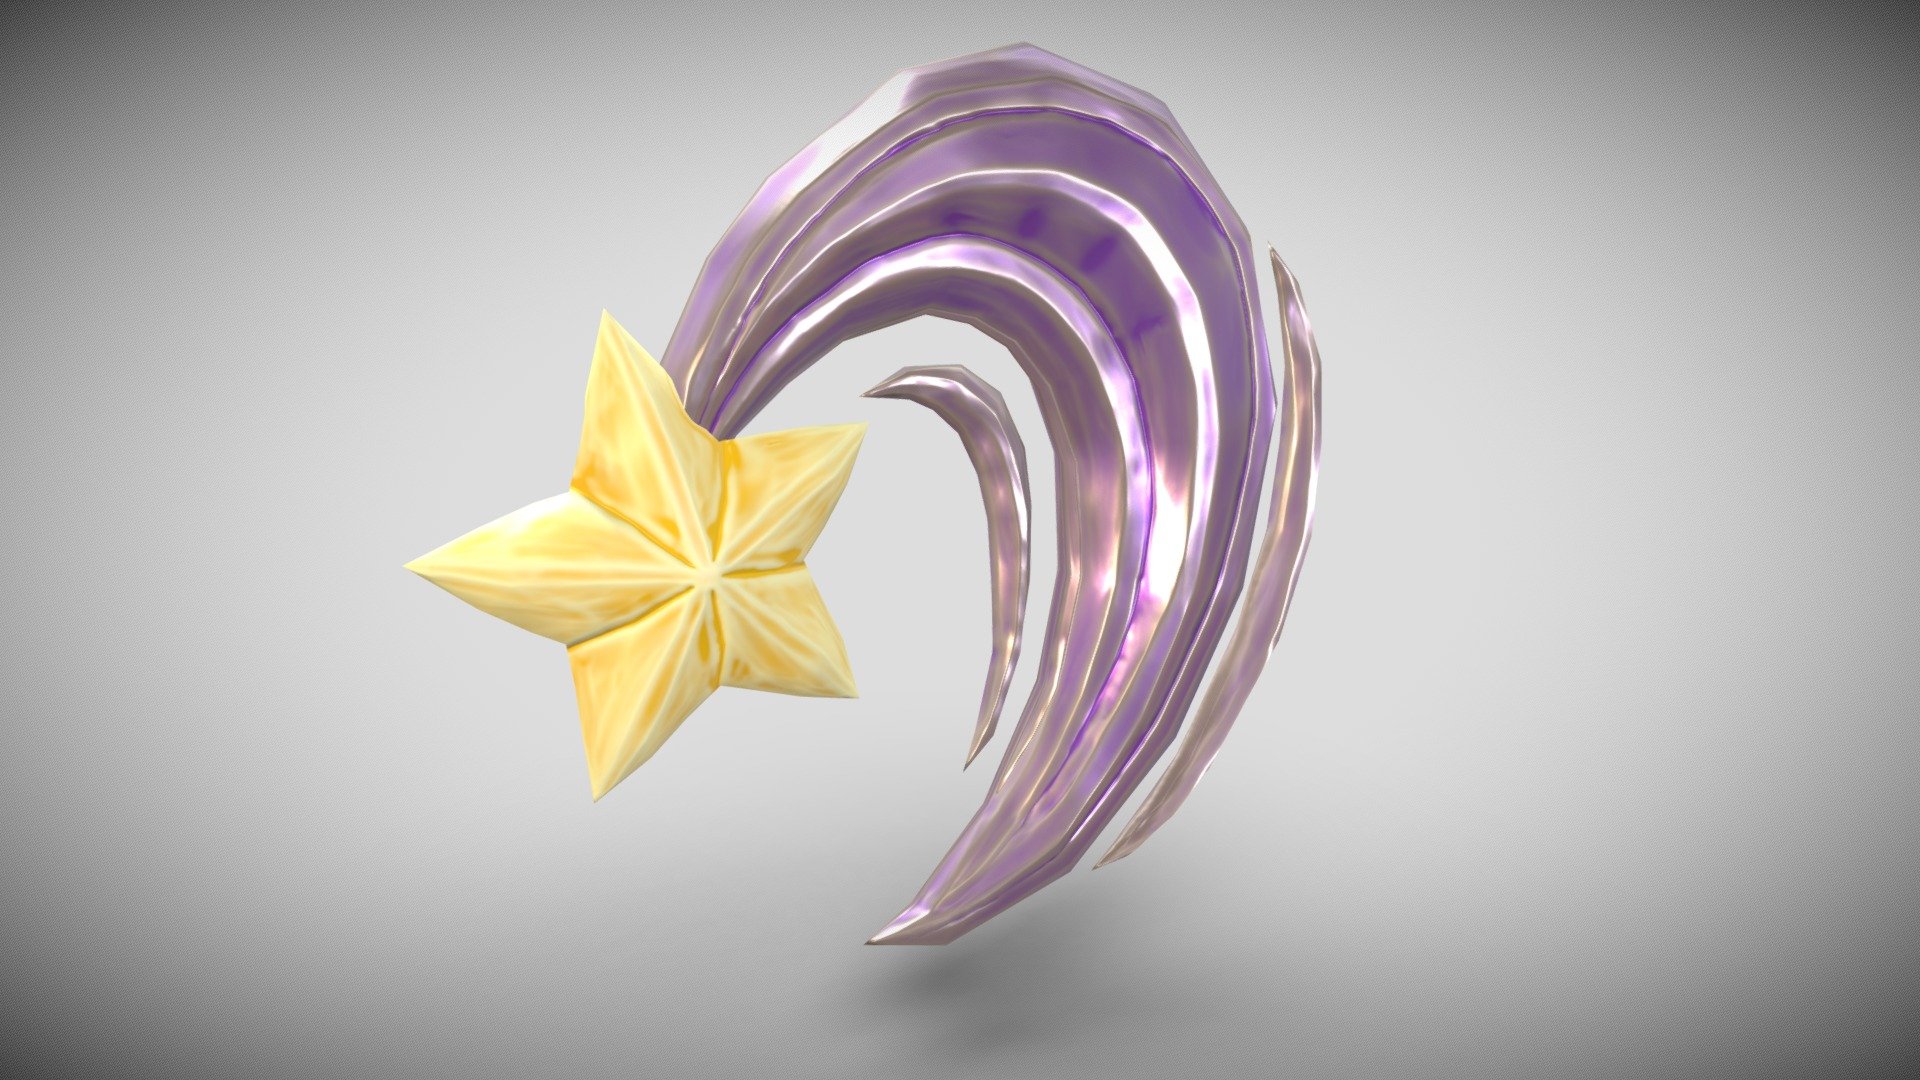 If you need additional work done do not hesitate to contact me, I am currently available for freelance work.

A stylized shooting star is quite hard to capture, but if seen in the starry night sky a wish has to be made! For a glimmering christmas  decoration or in a children room as night light.
Full retopology and pbr colored.

332 Vertices

Highpoly sculpted in Nomadsculpt. Lowpoly made in Blender
Highpoly and Lowpoly-model are in a Blend-file included in additional file with embedded materials.
Model and Concept by Me, Enya Gerber 3d model